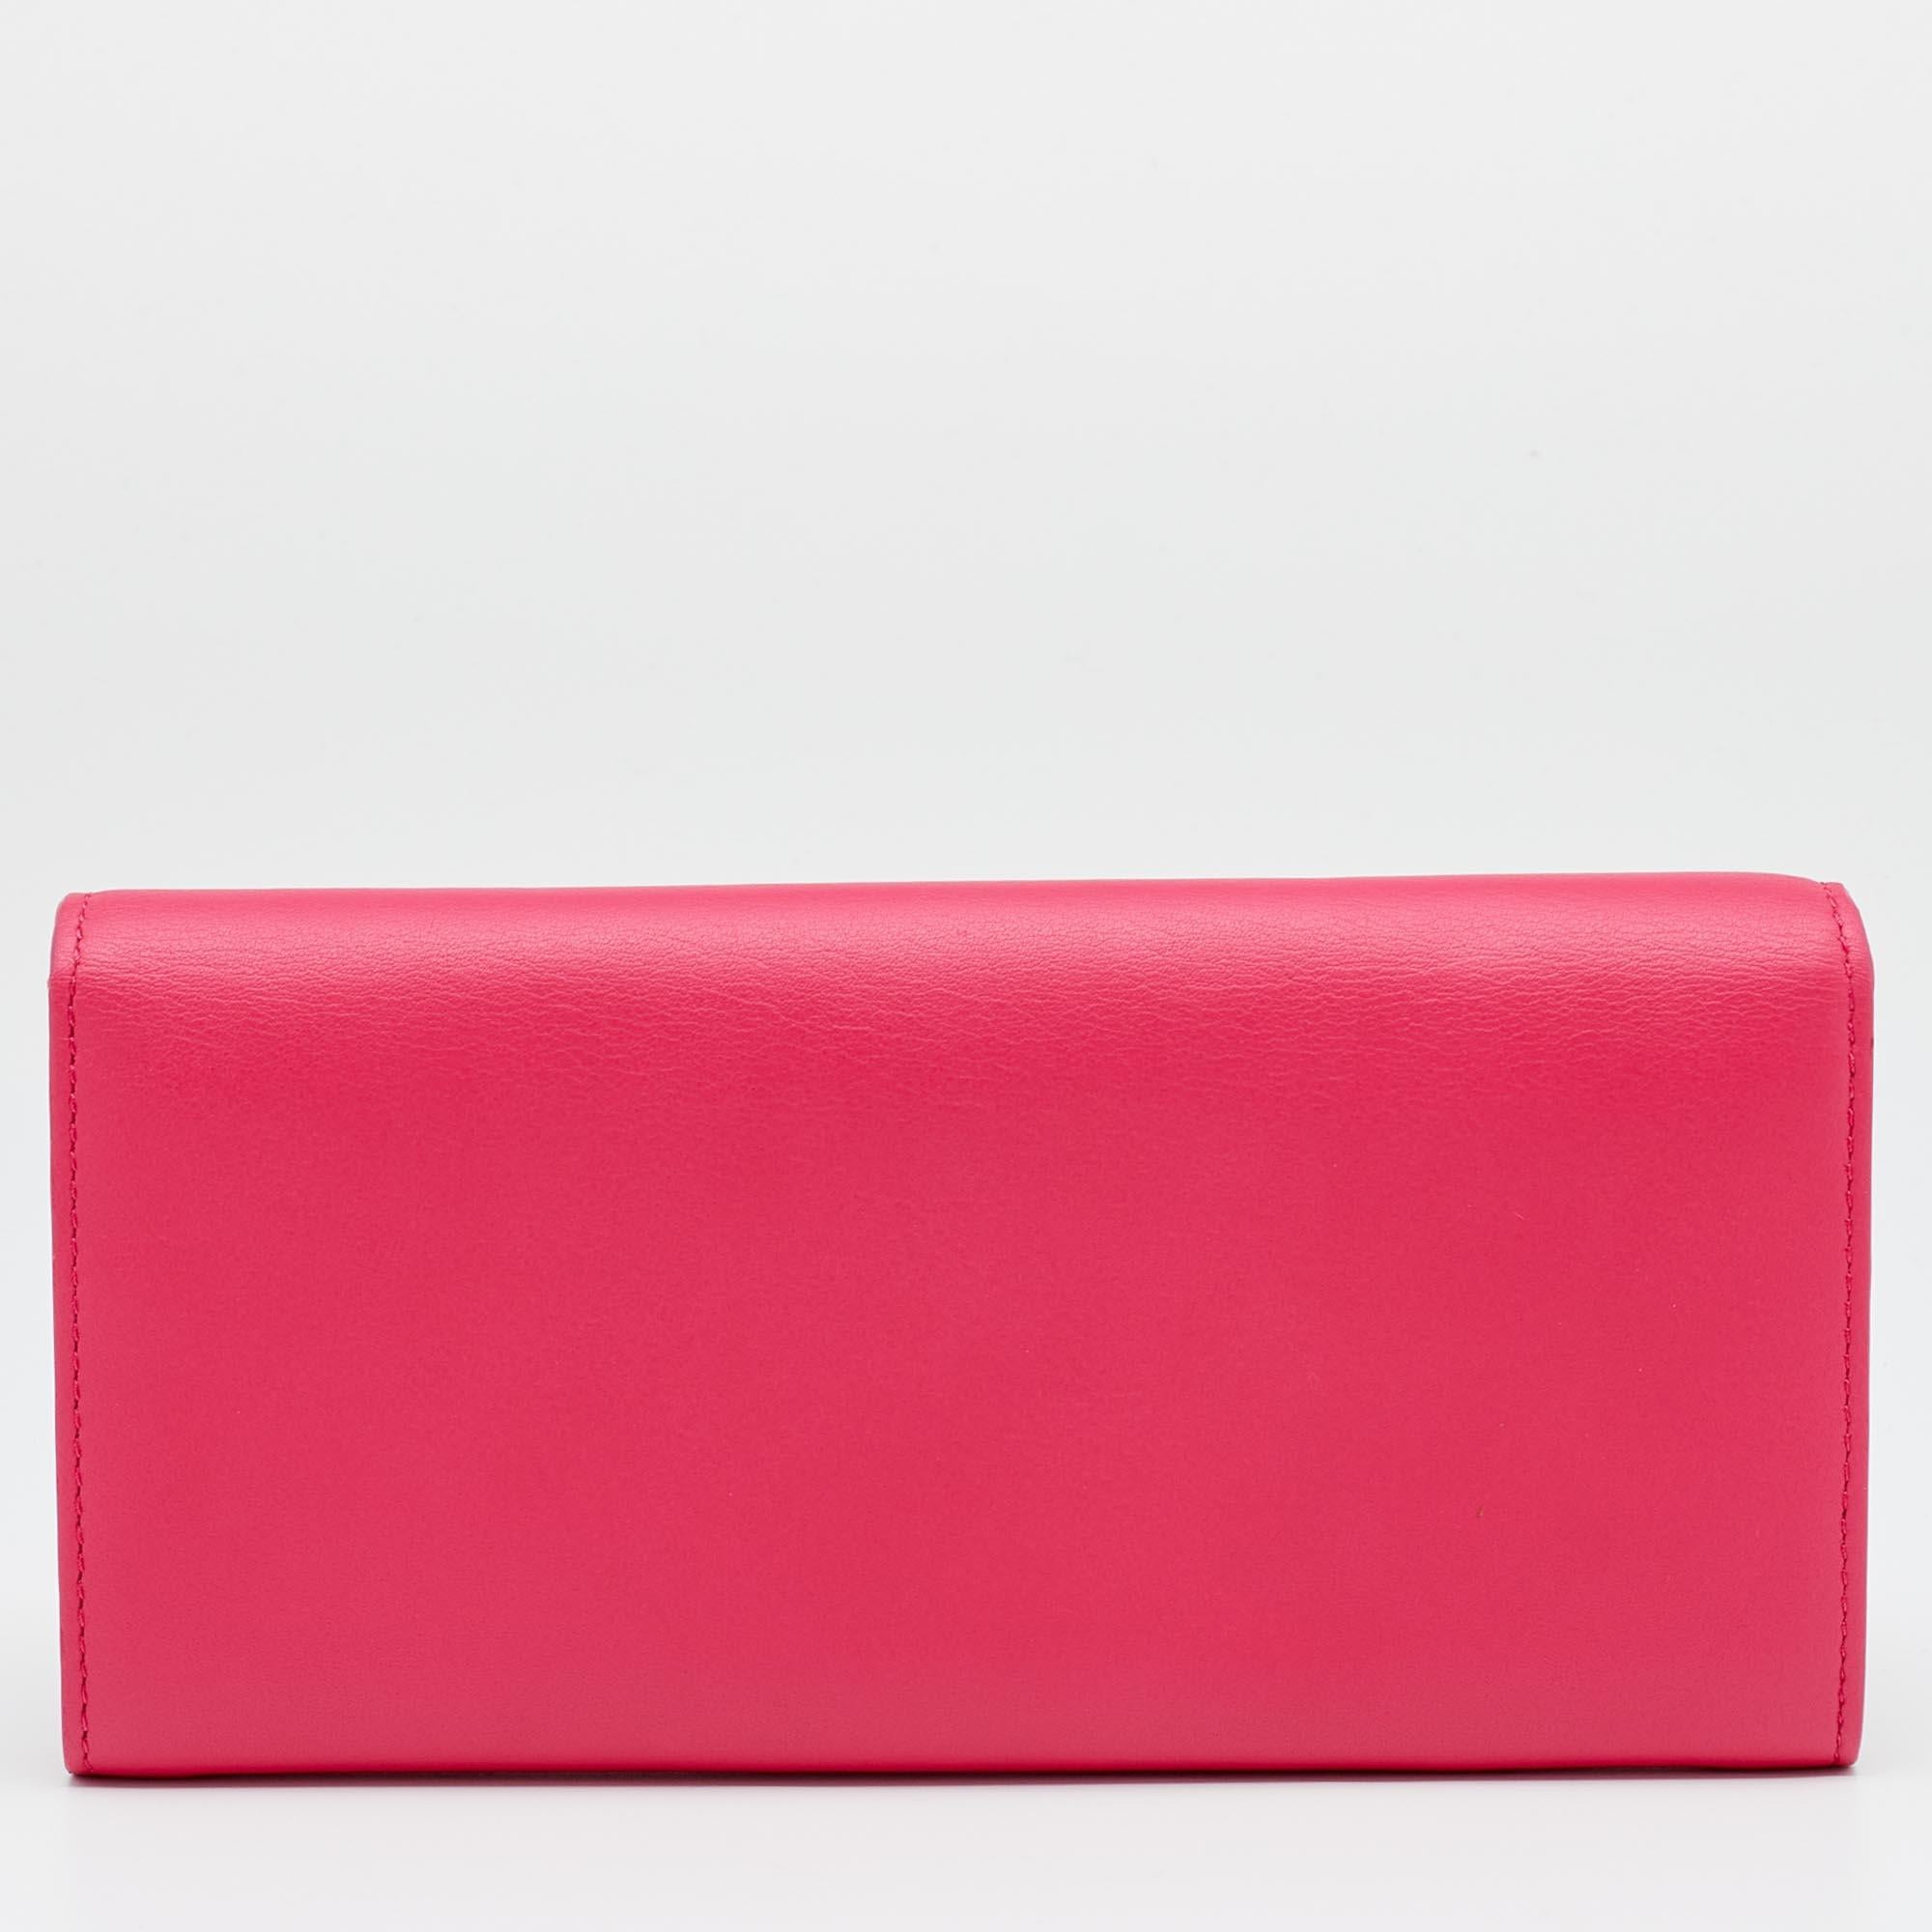 This Addict Rendez-Vous clutch bag from Christian Dior has a petite size but a charming look. Crafted from pink and orange leather, it features a CD stud on the front and is held by a chain. The flap opens to an interior that houses a zipper pocket